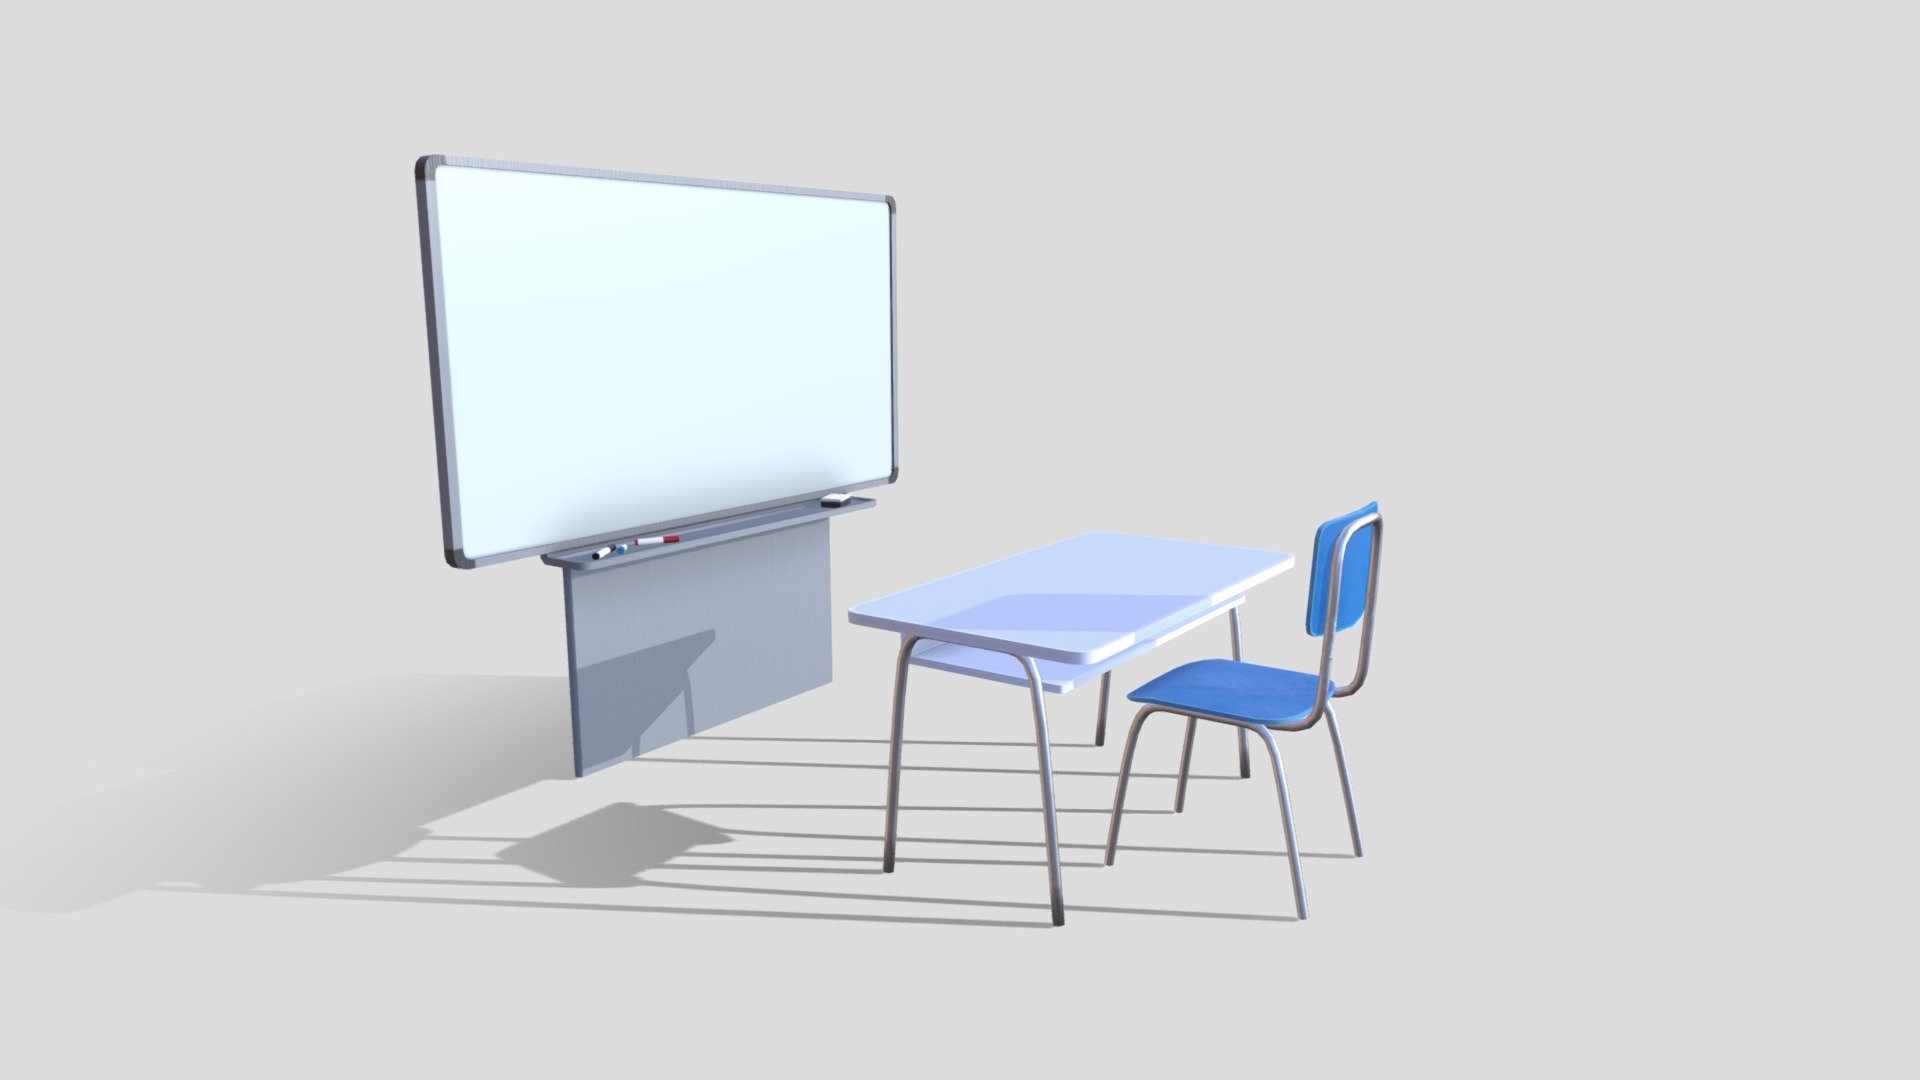 A furniture bundle for a school or work setting with a typical plastic chair, desk and white board.

Models:

Plastic Chair + Textures 
Plastic/White Desk + Textures
White Board + Texture
White Board Props: White Board Pens and a Sponge (Model + Texture)

Check out our bundles on certain settings, we’ve got more models to offer 3d model